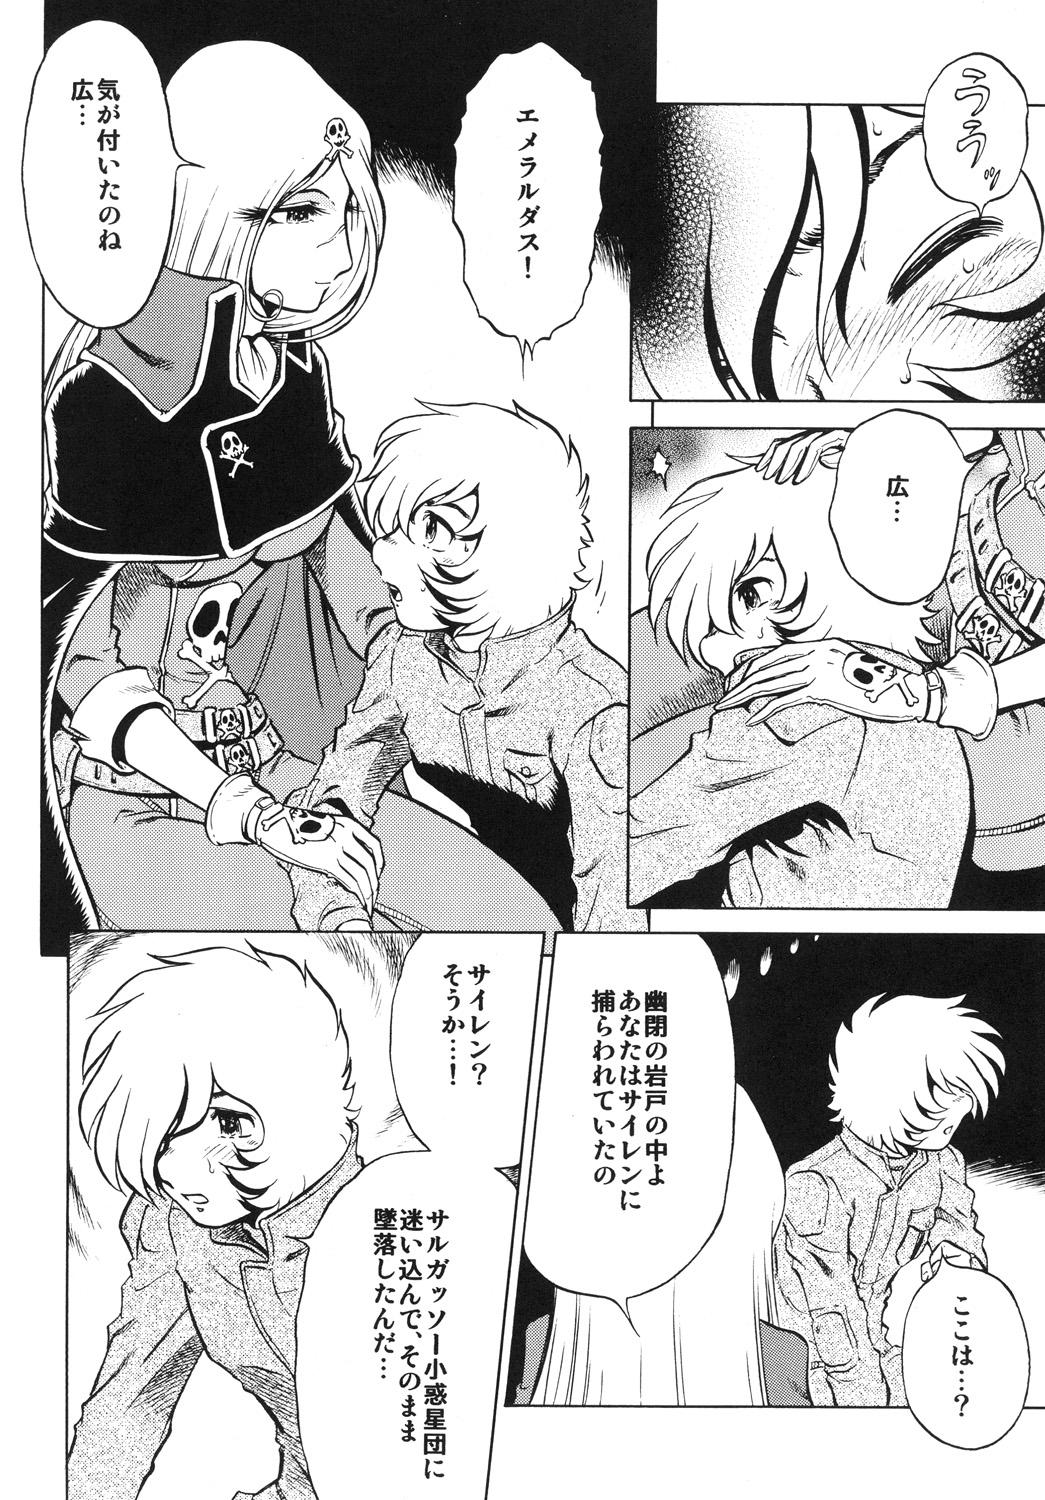 Best Blowjob NightHead+2 - Space pirate captain harlock Francaise - Page 7